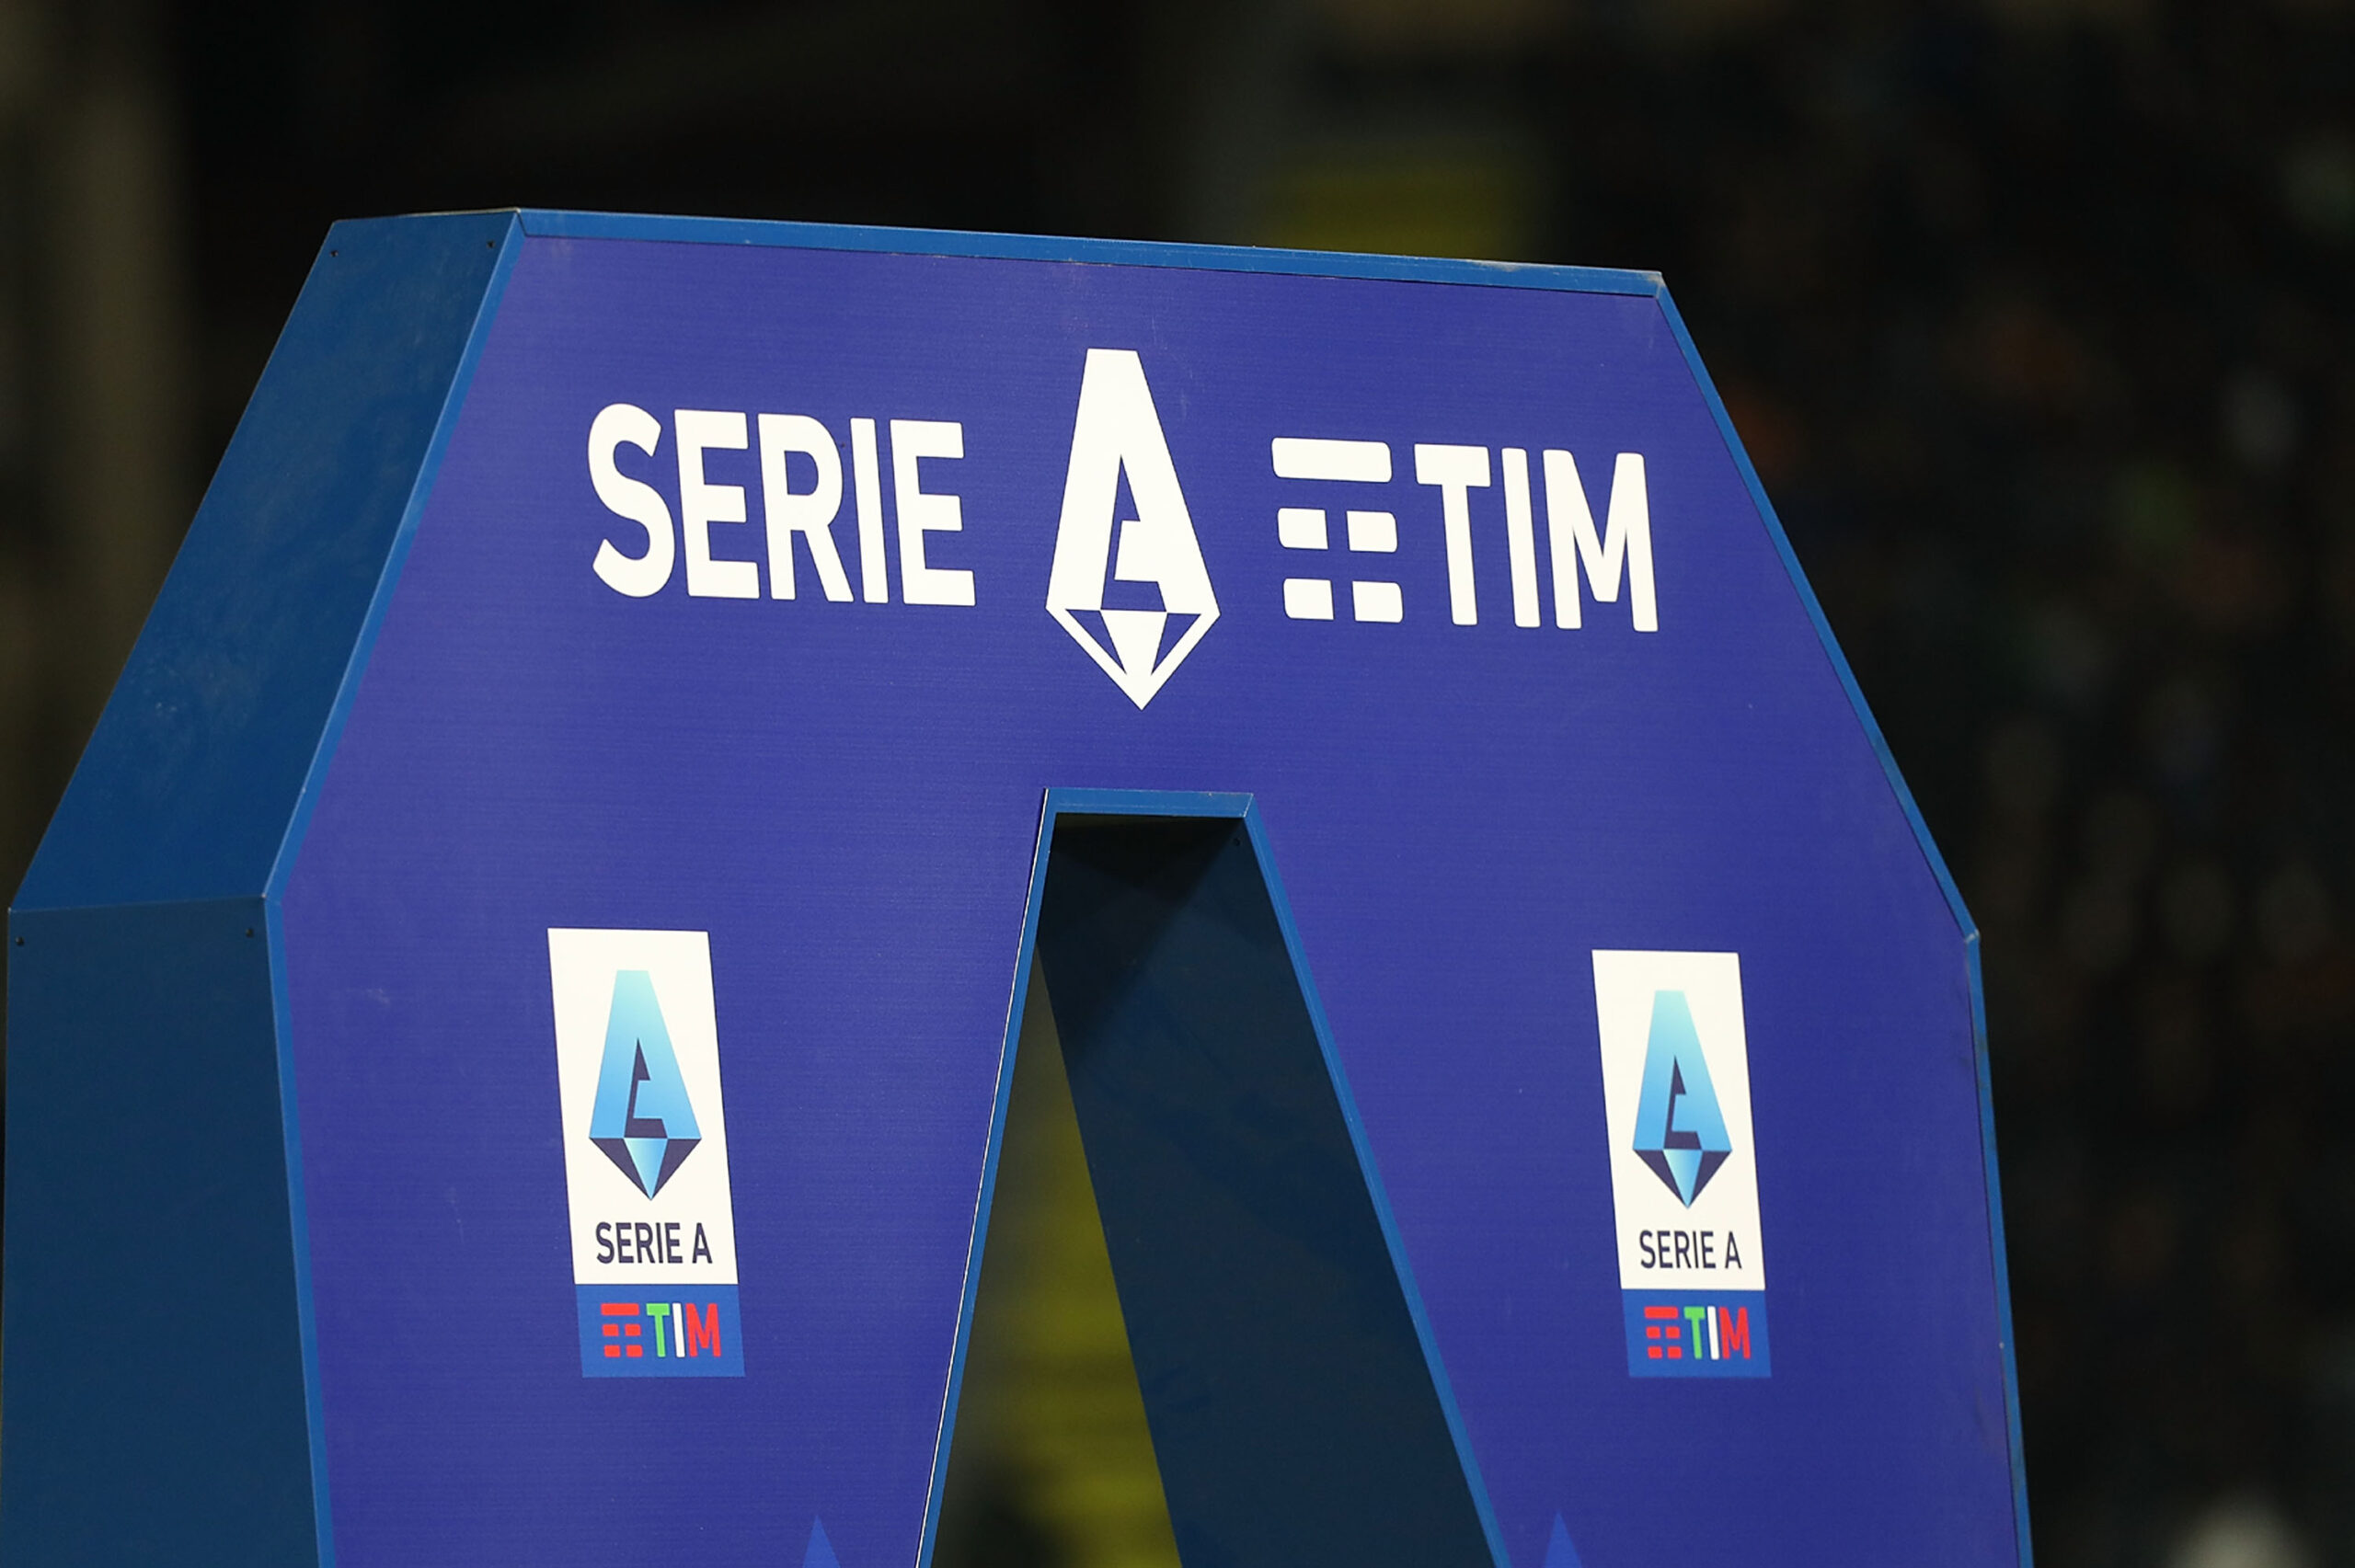 Four Serie A matches will not take place today because of COVID-19. Salernitana, Udinese, Bologna and Torino are dealing with team-wide outbreaks.